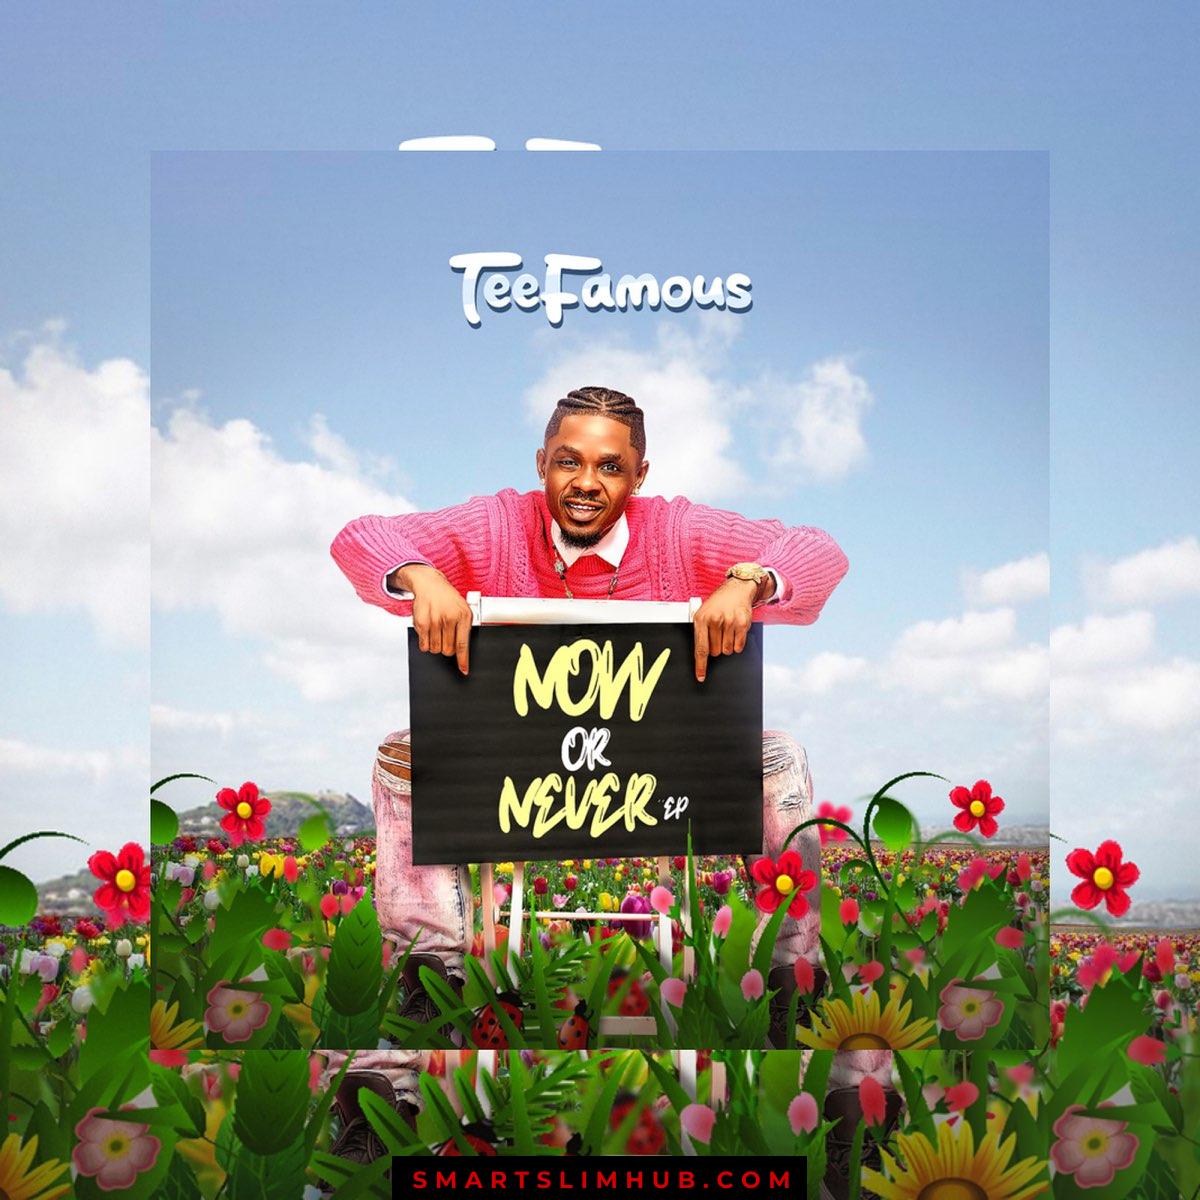 Teefamous – Now or Never EP